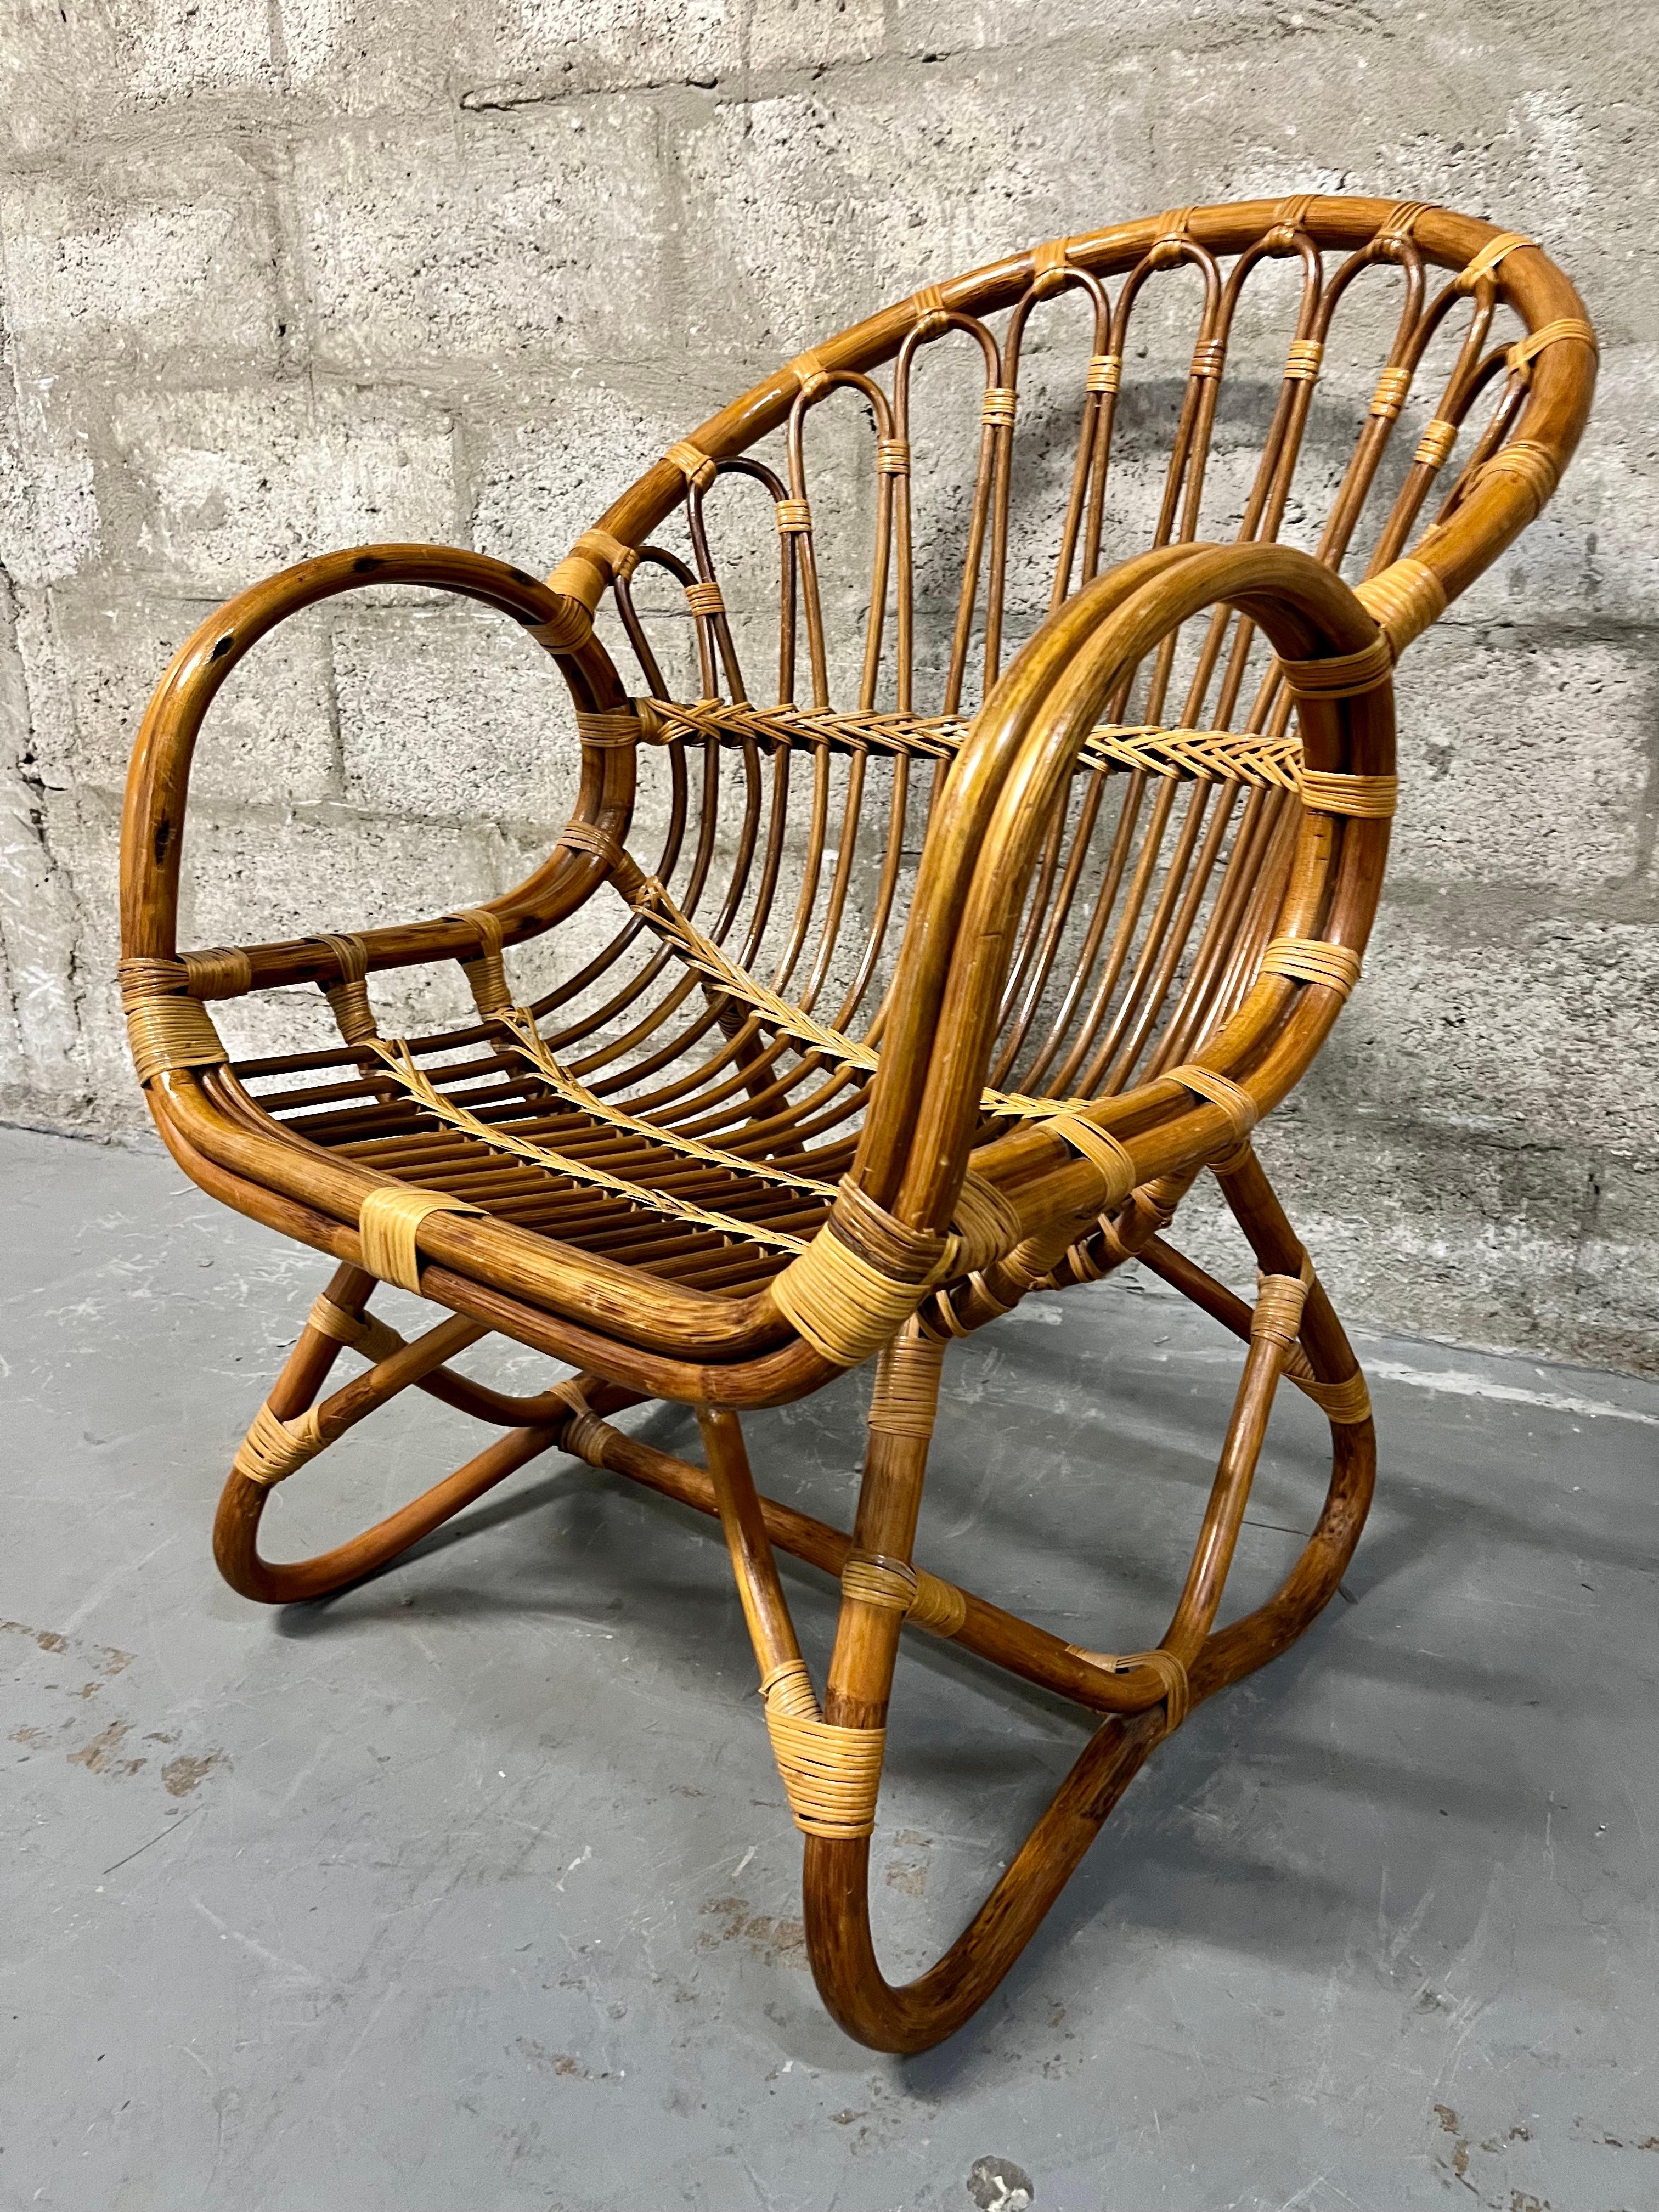 Mid Century Modern / Boho Chic Style Rattan Lounge Chair in the Franco Albini Manner. Circa 1960s
Features a sophisticated design with rounded armrests, backrest and legs, and intricate braiding details. 
In excellent original condition with very